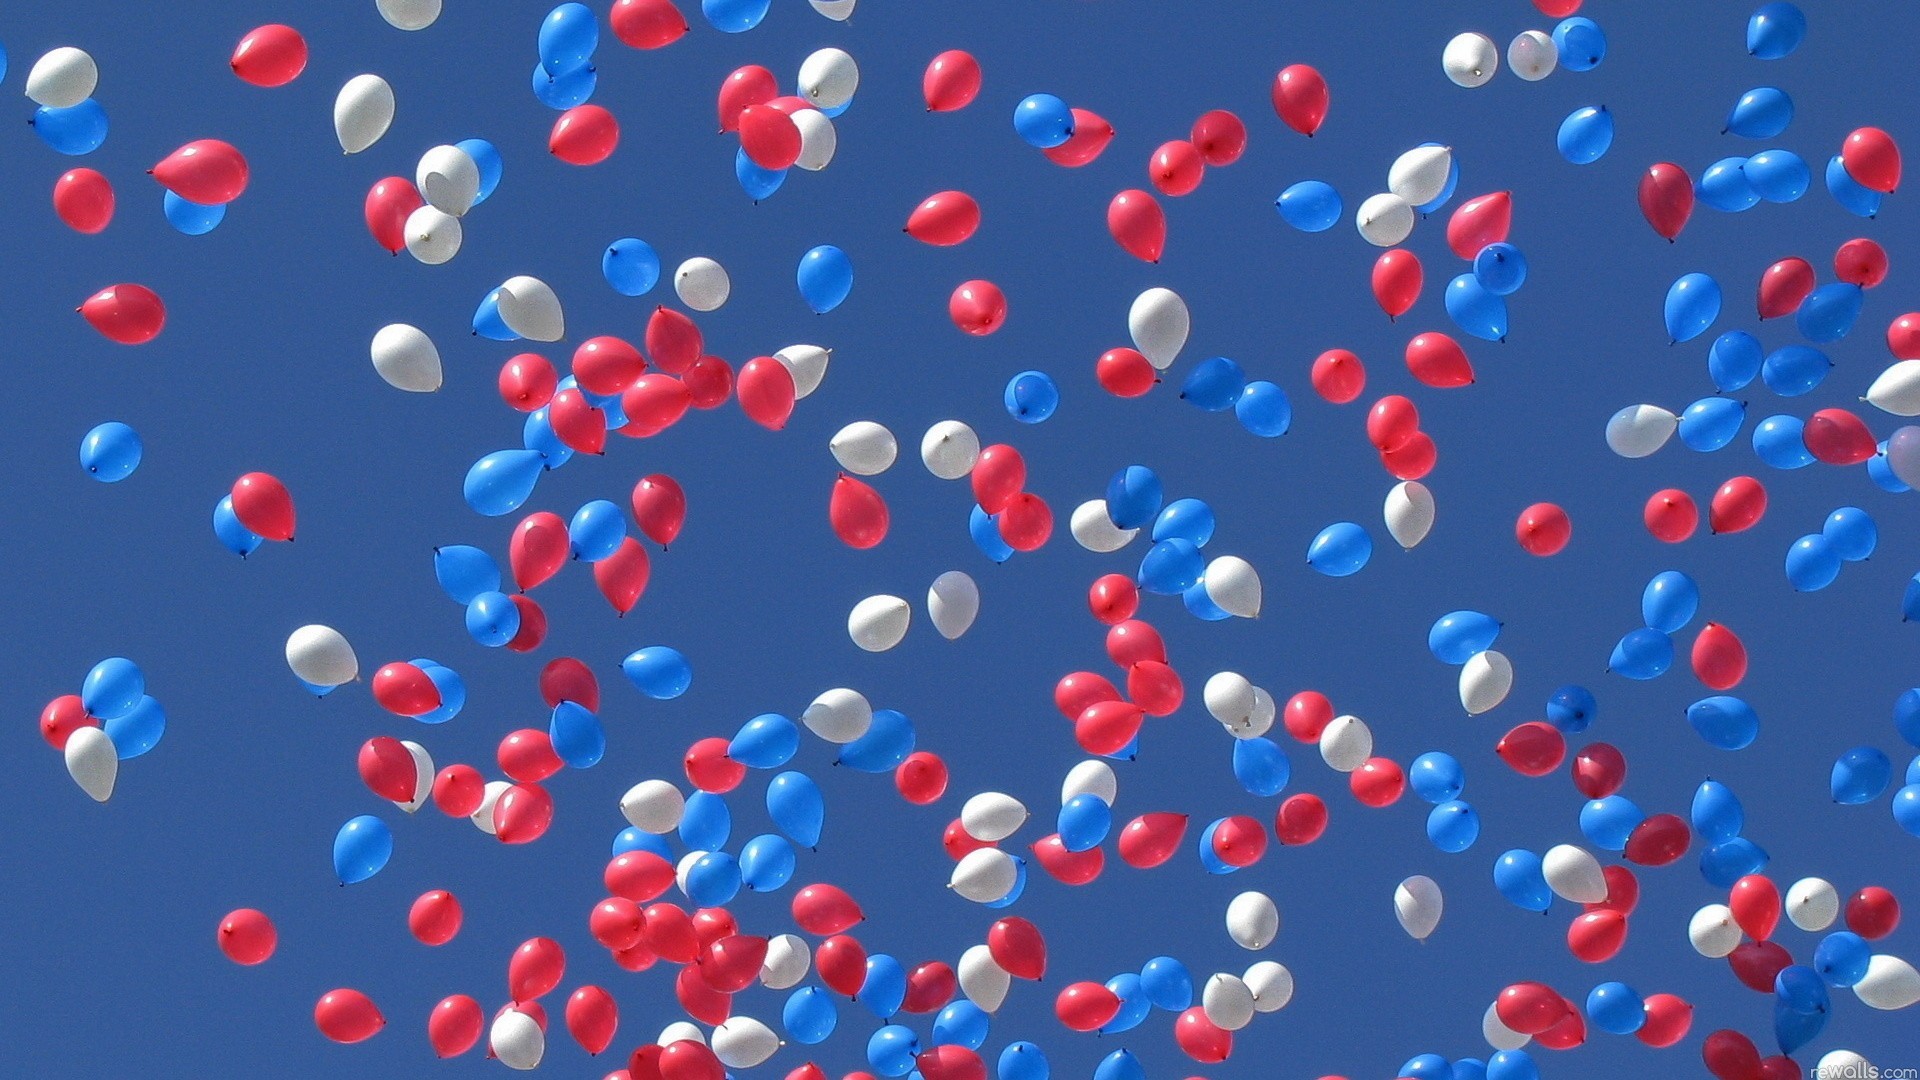 Red White and Blue Backgrounds, HQ, Timotheus Jellyman